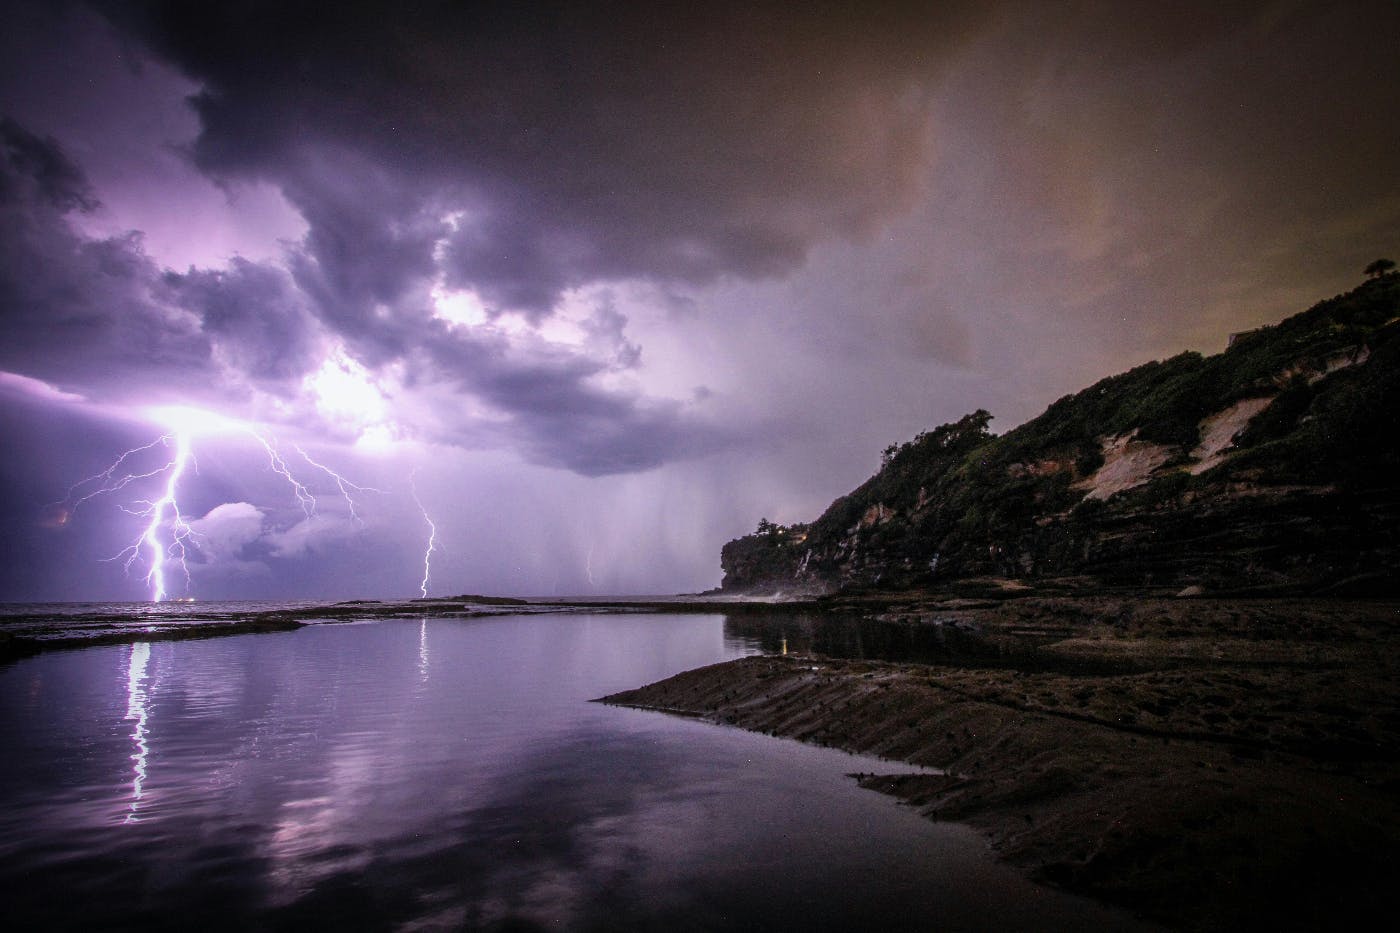 A storm over the sea with lightning strikes